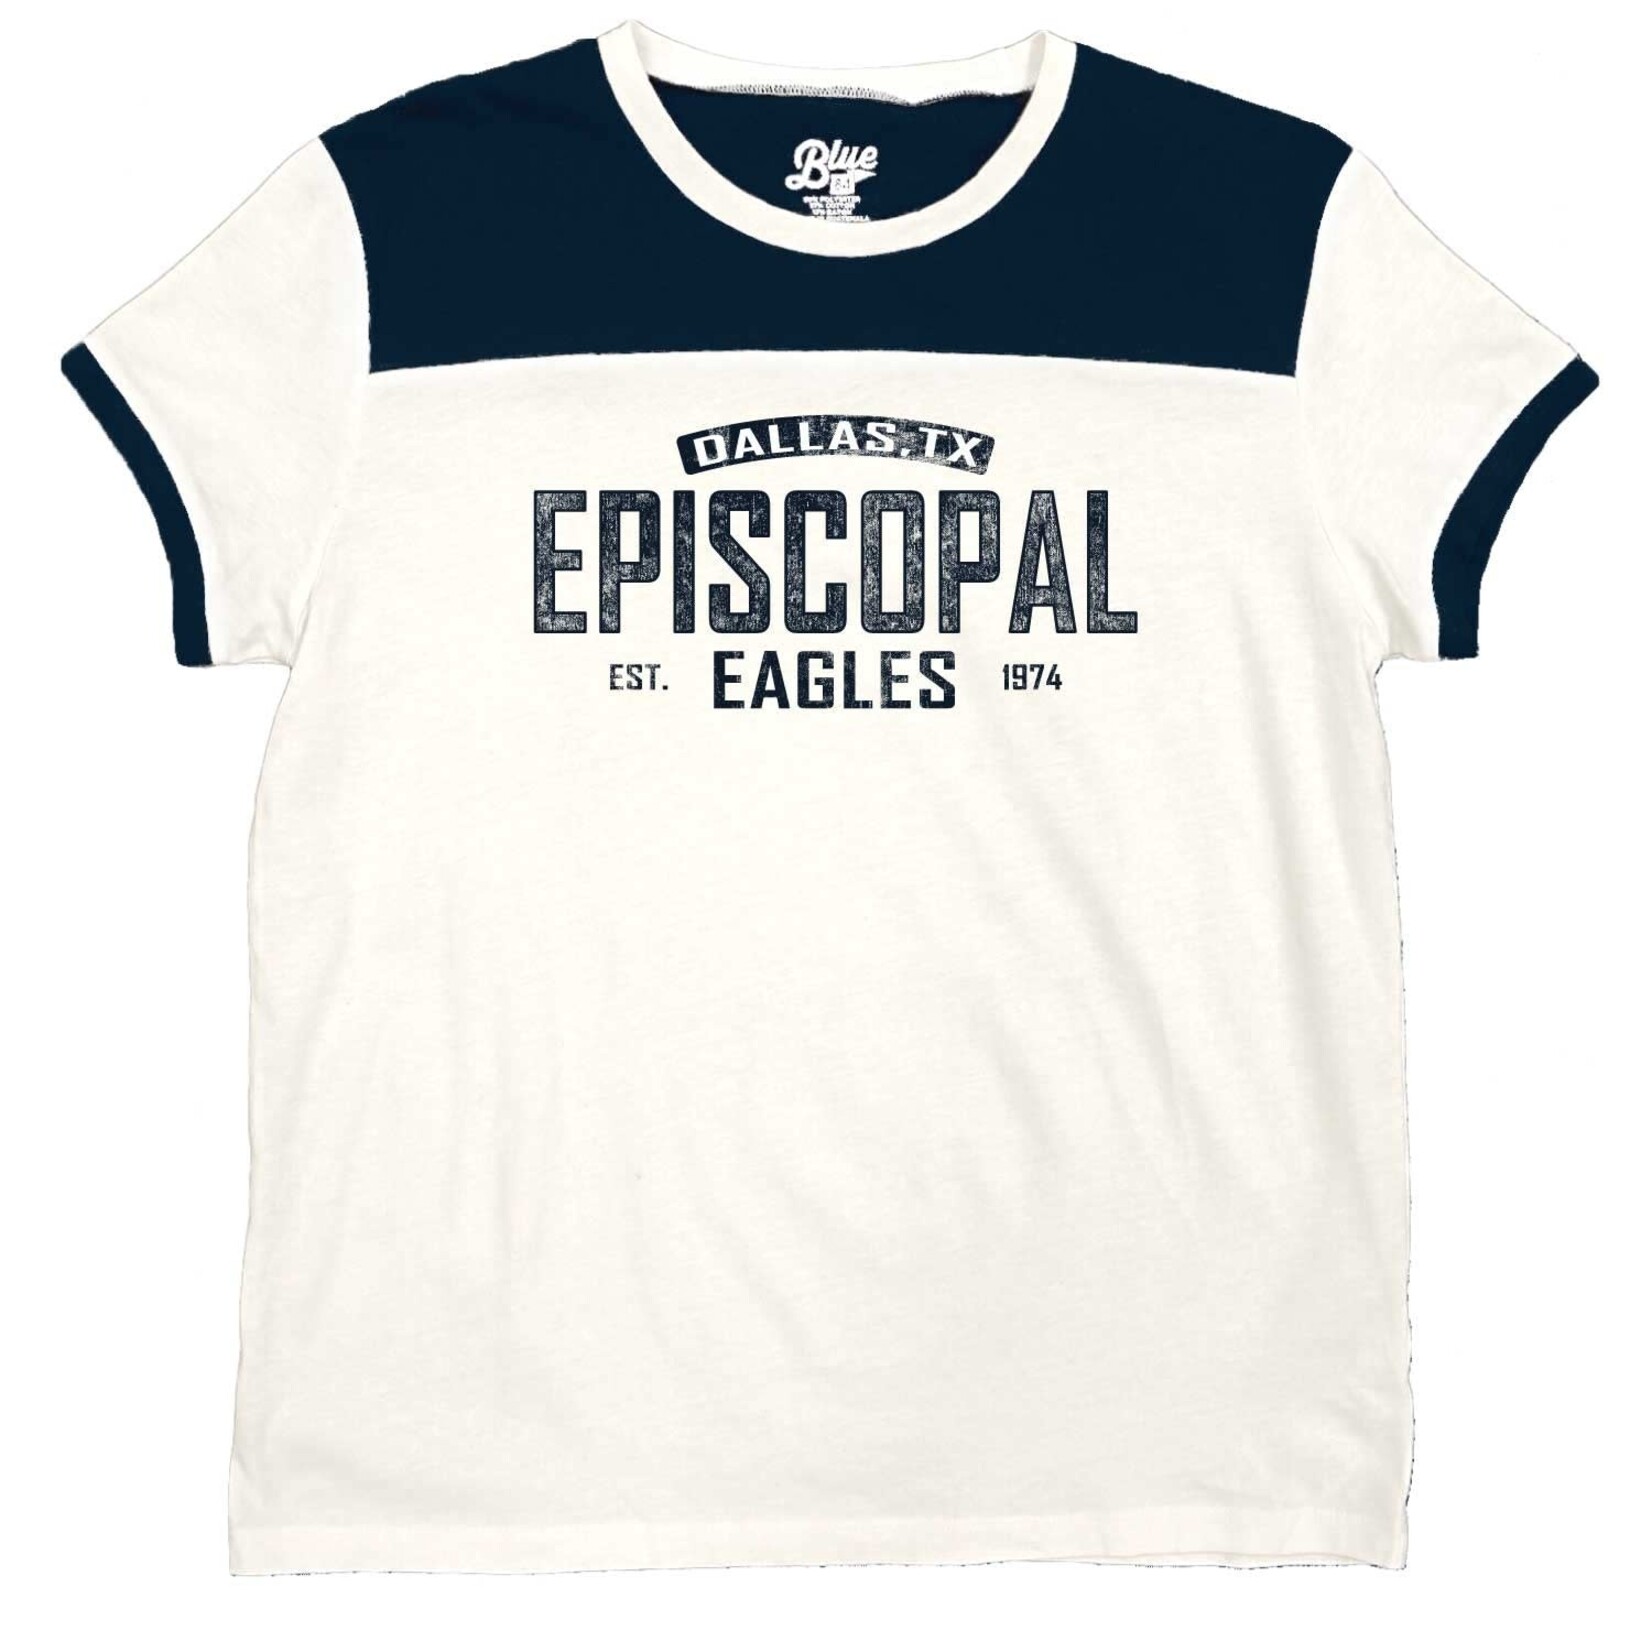 Blue 84 Jersey Contrast Tee - The Eagle's Nest